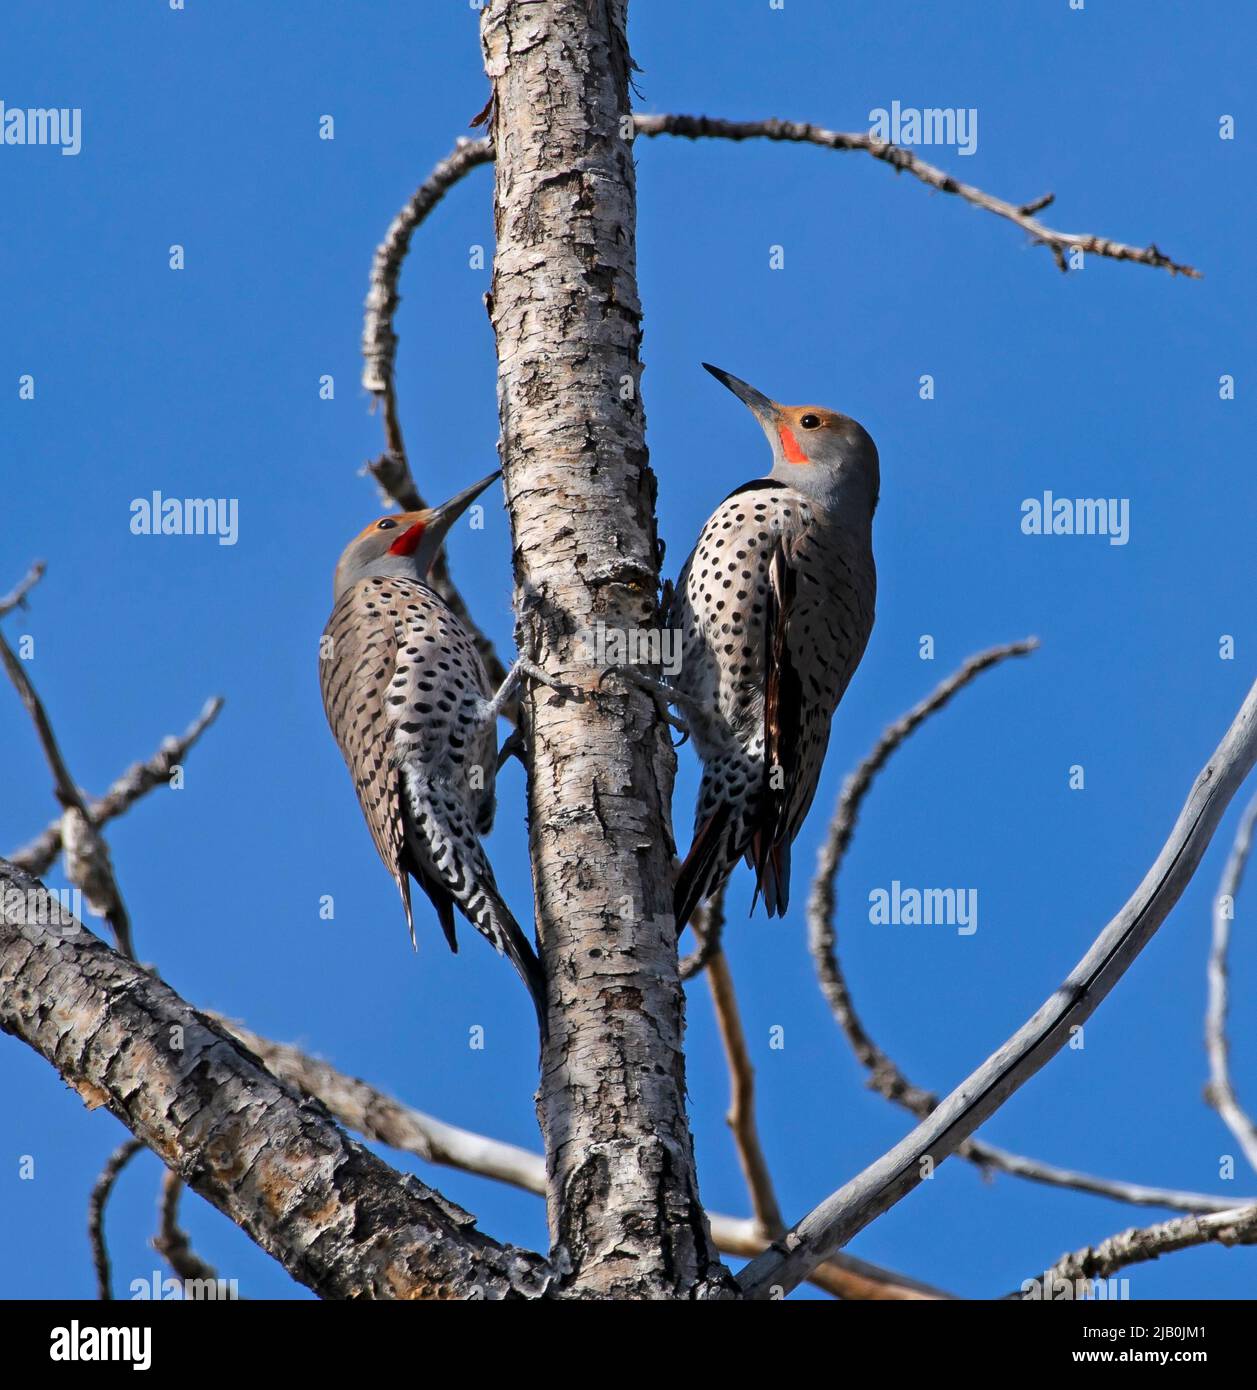 Spring courtship with Northern Flicker (Colaptes auratus) pair in spring 2022 along Greenway in Boise, Idaho, USA. Stock Photo